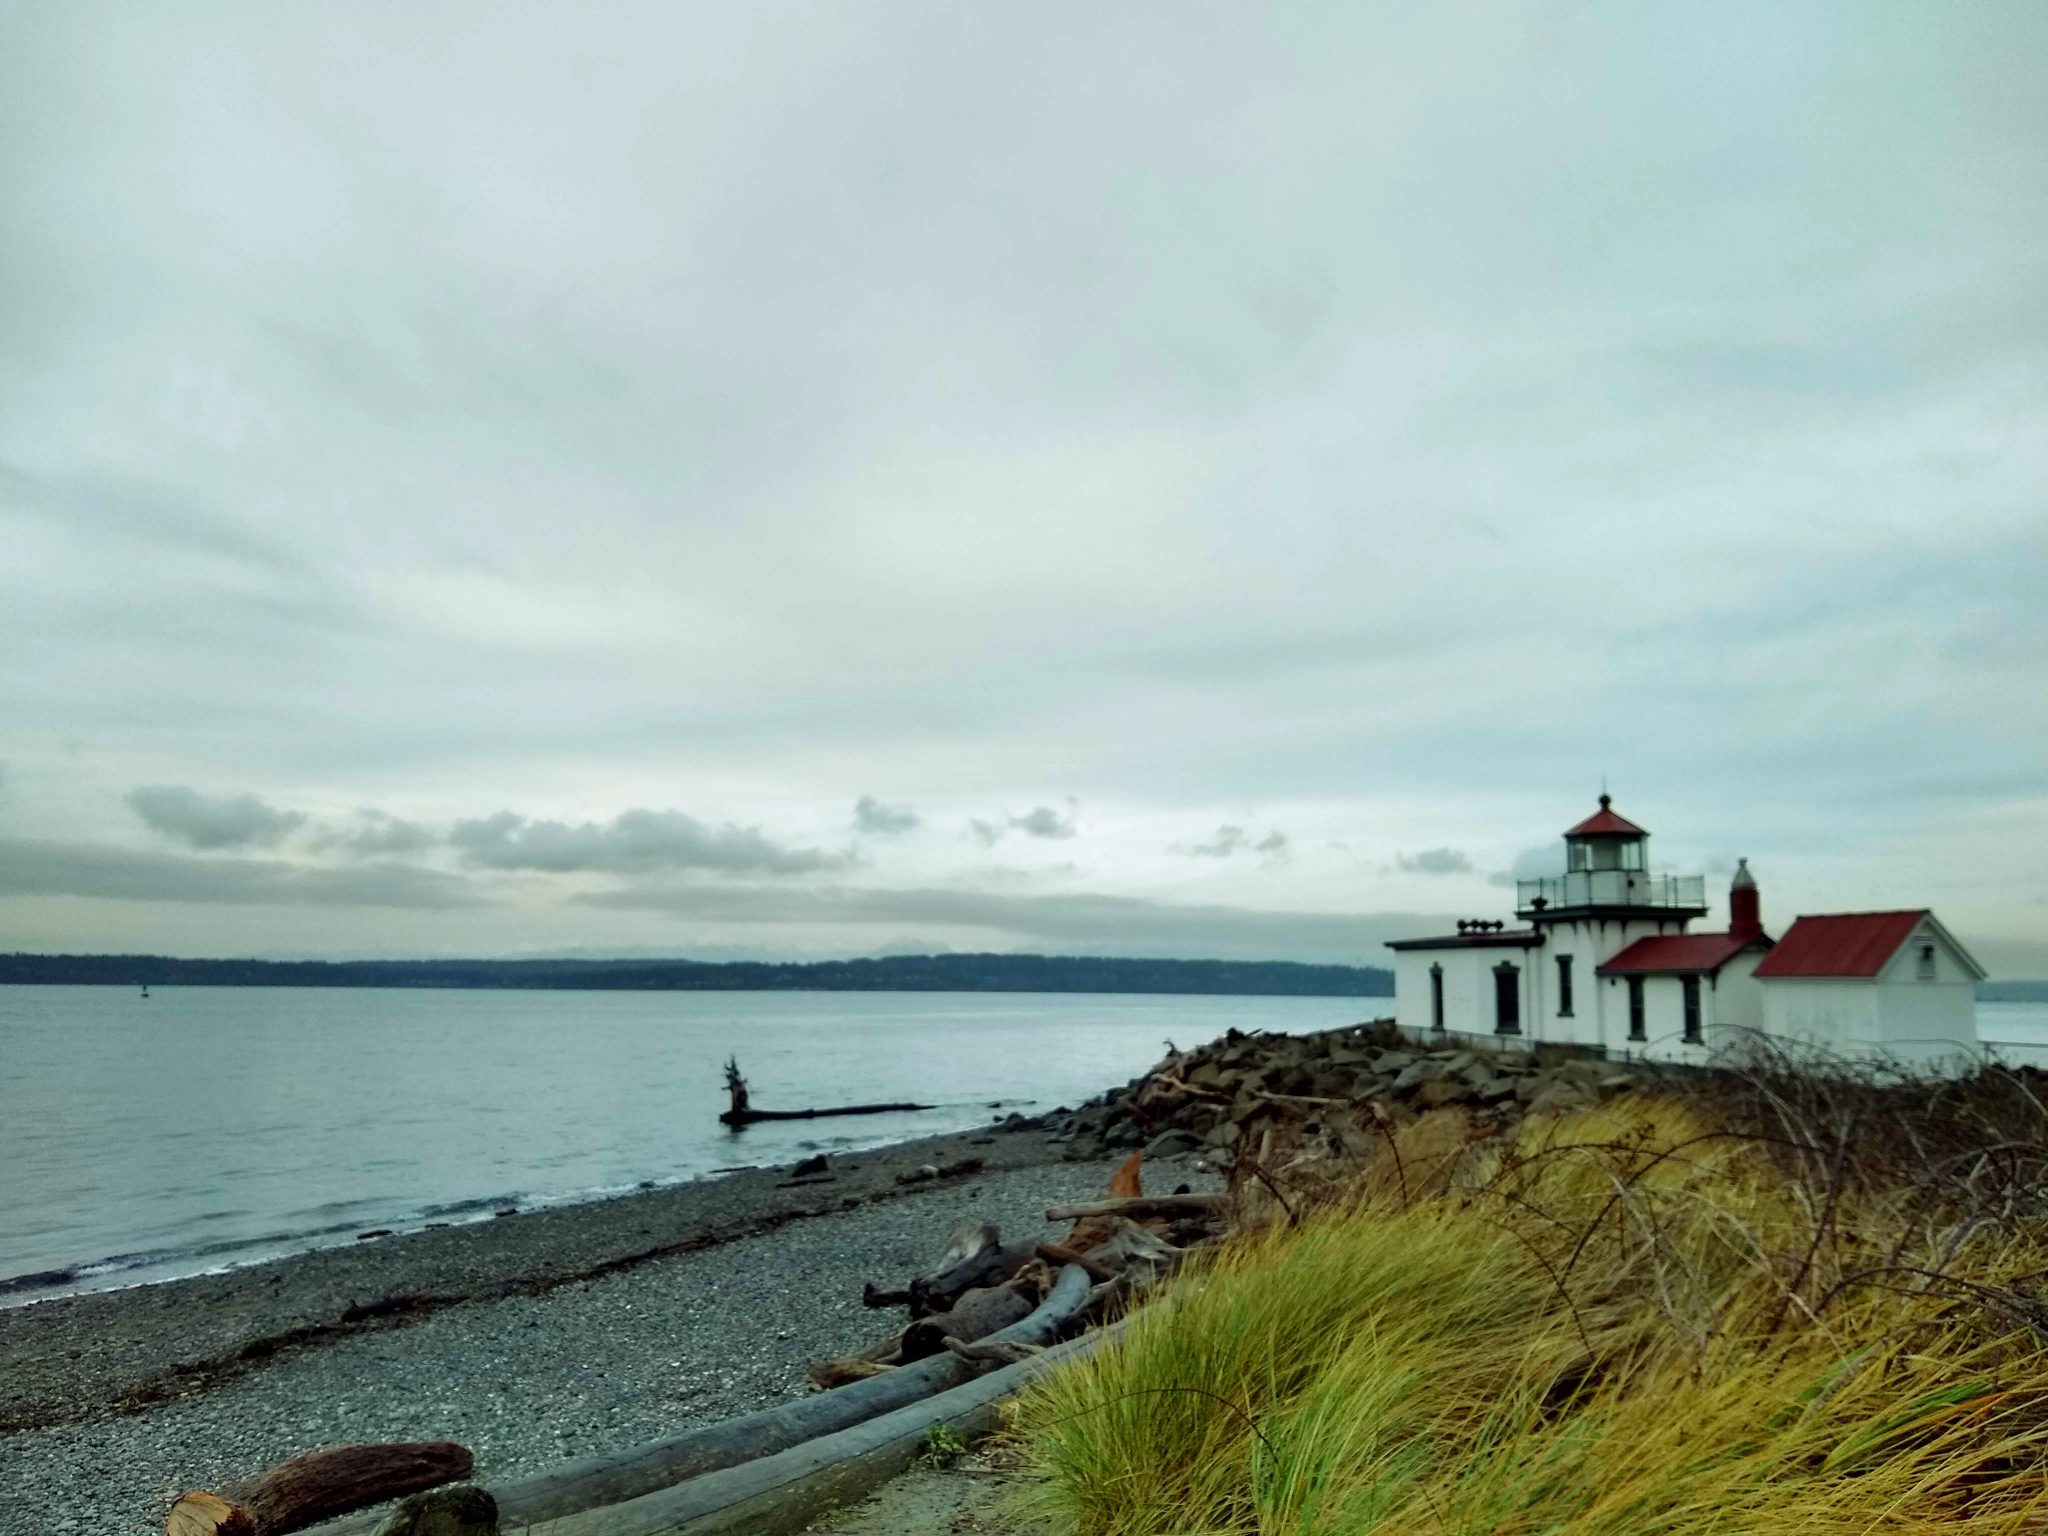 Outdoor activities in Seattle include beaches such as this one by the Westpoint lighthouse. The lighthouse is on a gravel beach with driftwood and rocks. The water is calm and forested hills are seen across the water. It's an overcast day